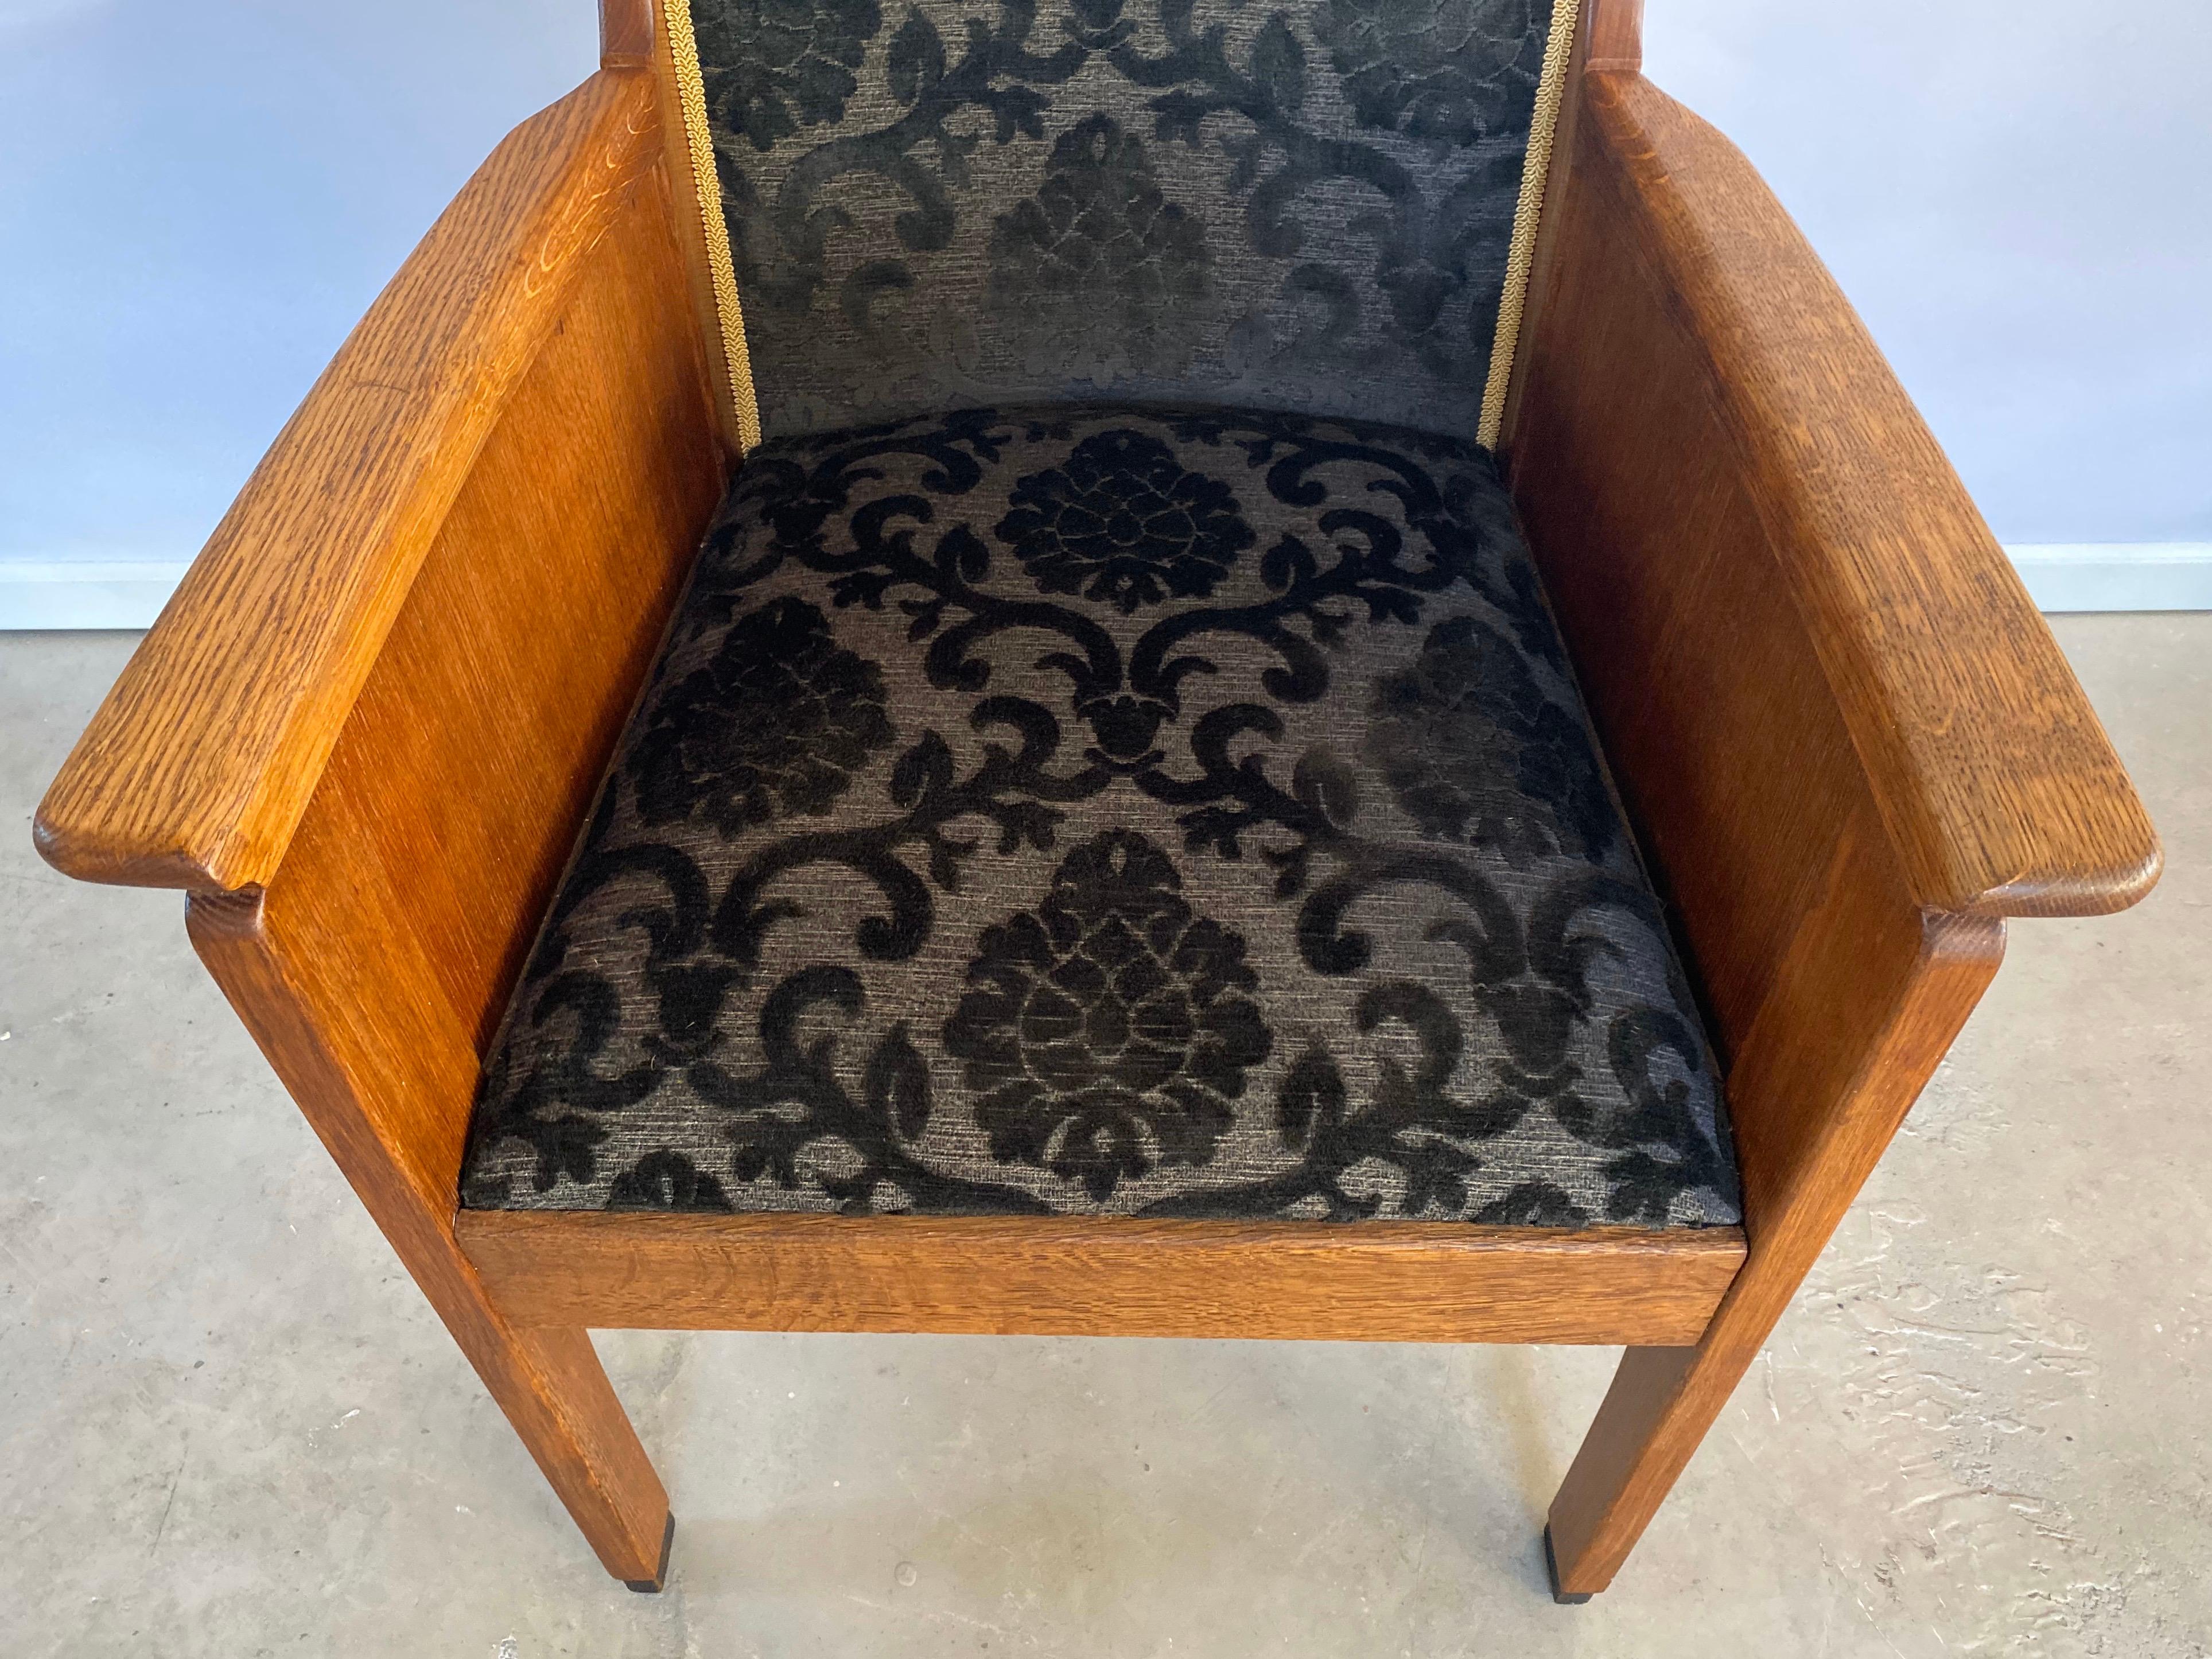 Beautiful example of a Haagse School (The Hague School) style Dutch Art Deco armchair. In contrary to the Amsterdam School, this architecture and design movement characterizes itself by the sharp contracting lines and the functionality rather than